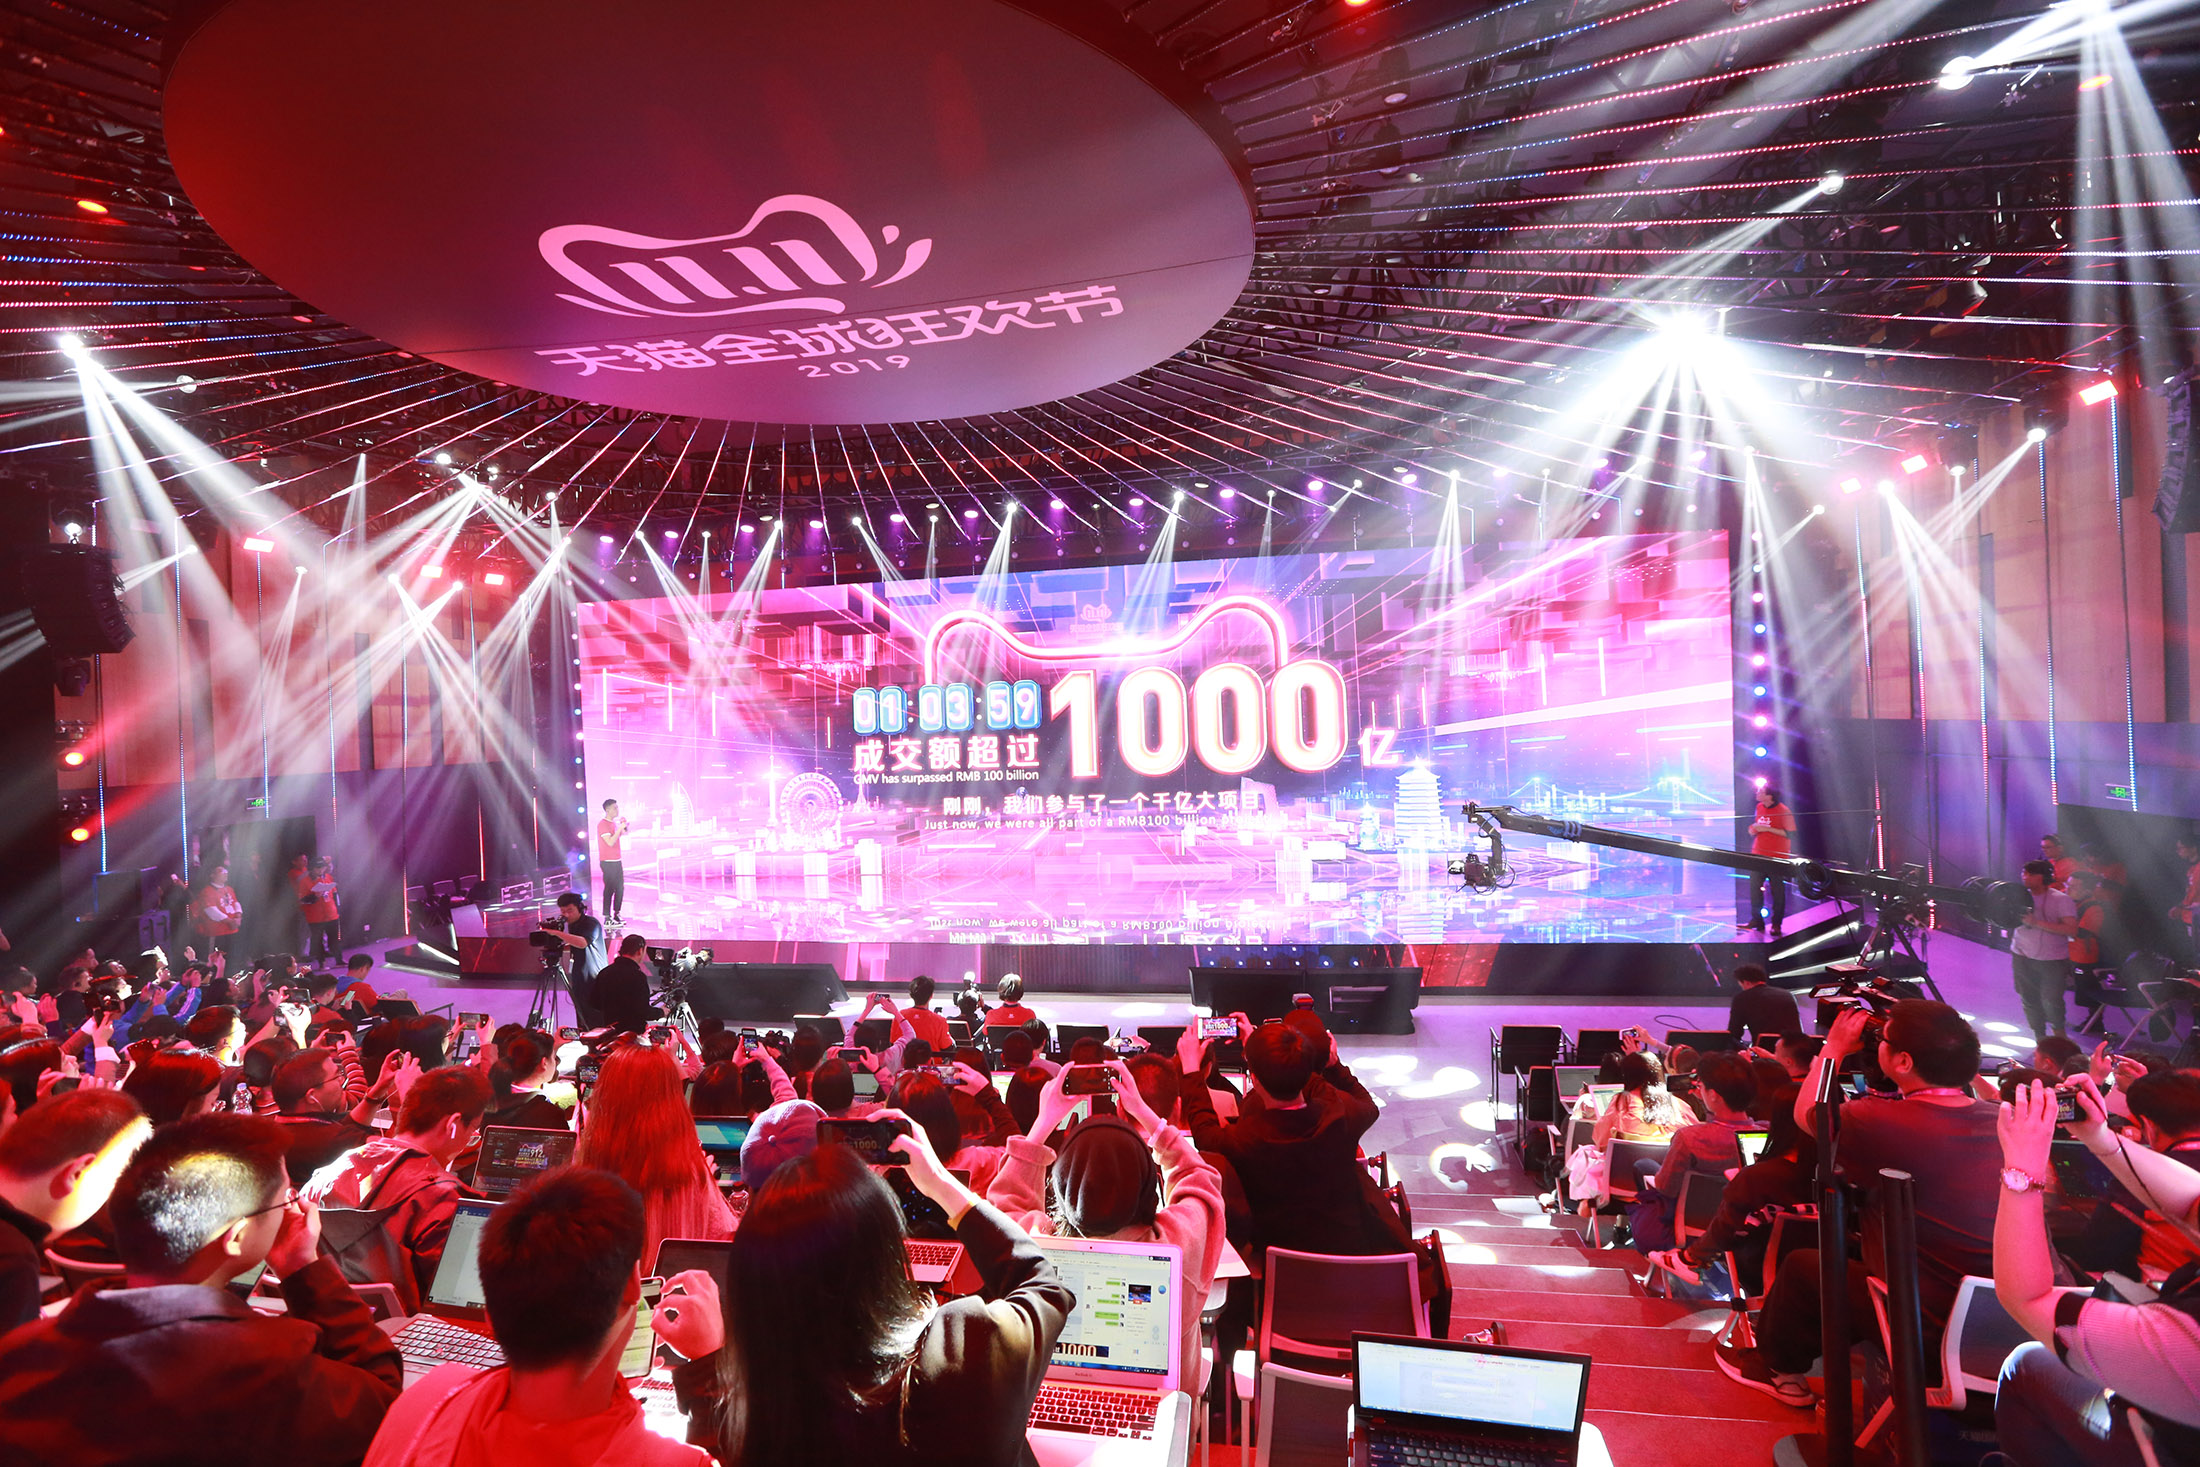 A screen shows Alibaba's sales volume exceeding 100 billion yuan after one hour during 2019 Alibaba 11.11 Global Shopping Festival.